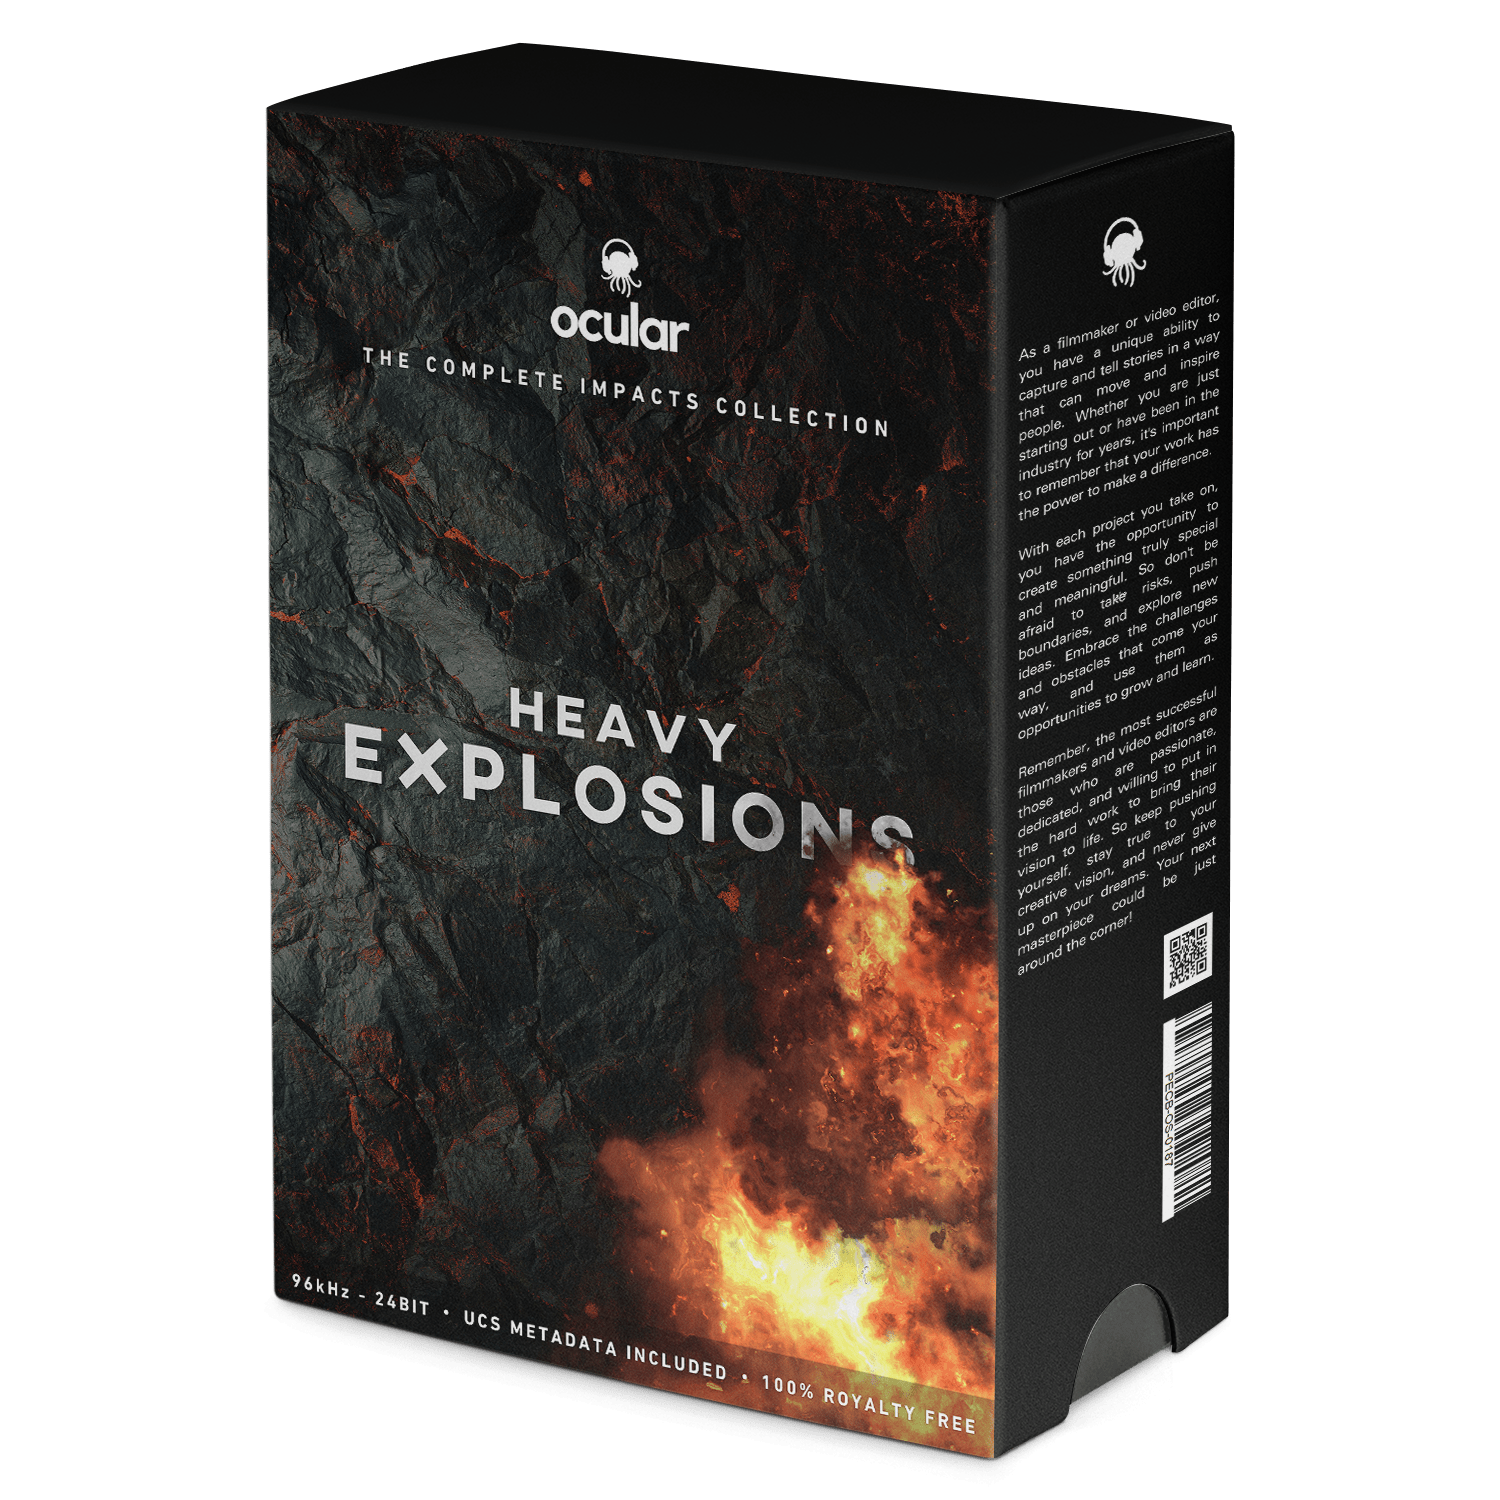 Explosions Sound Effects for video editing.